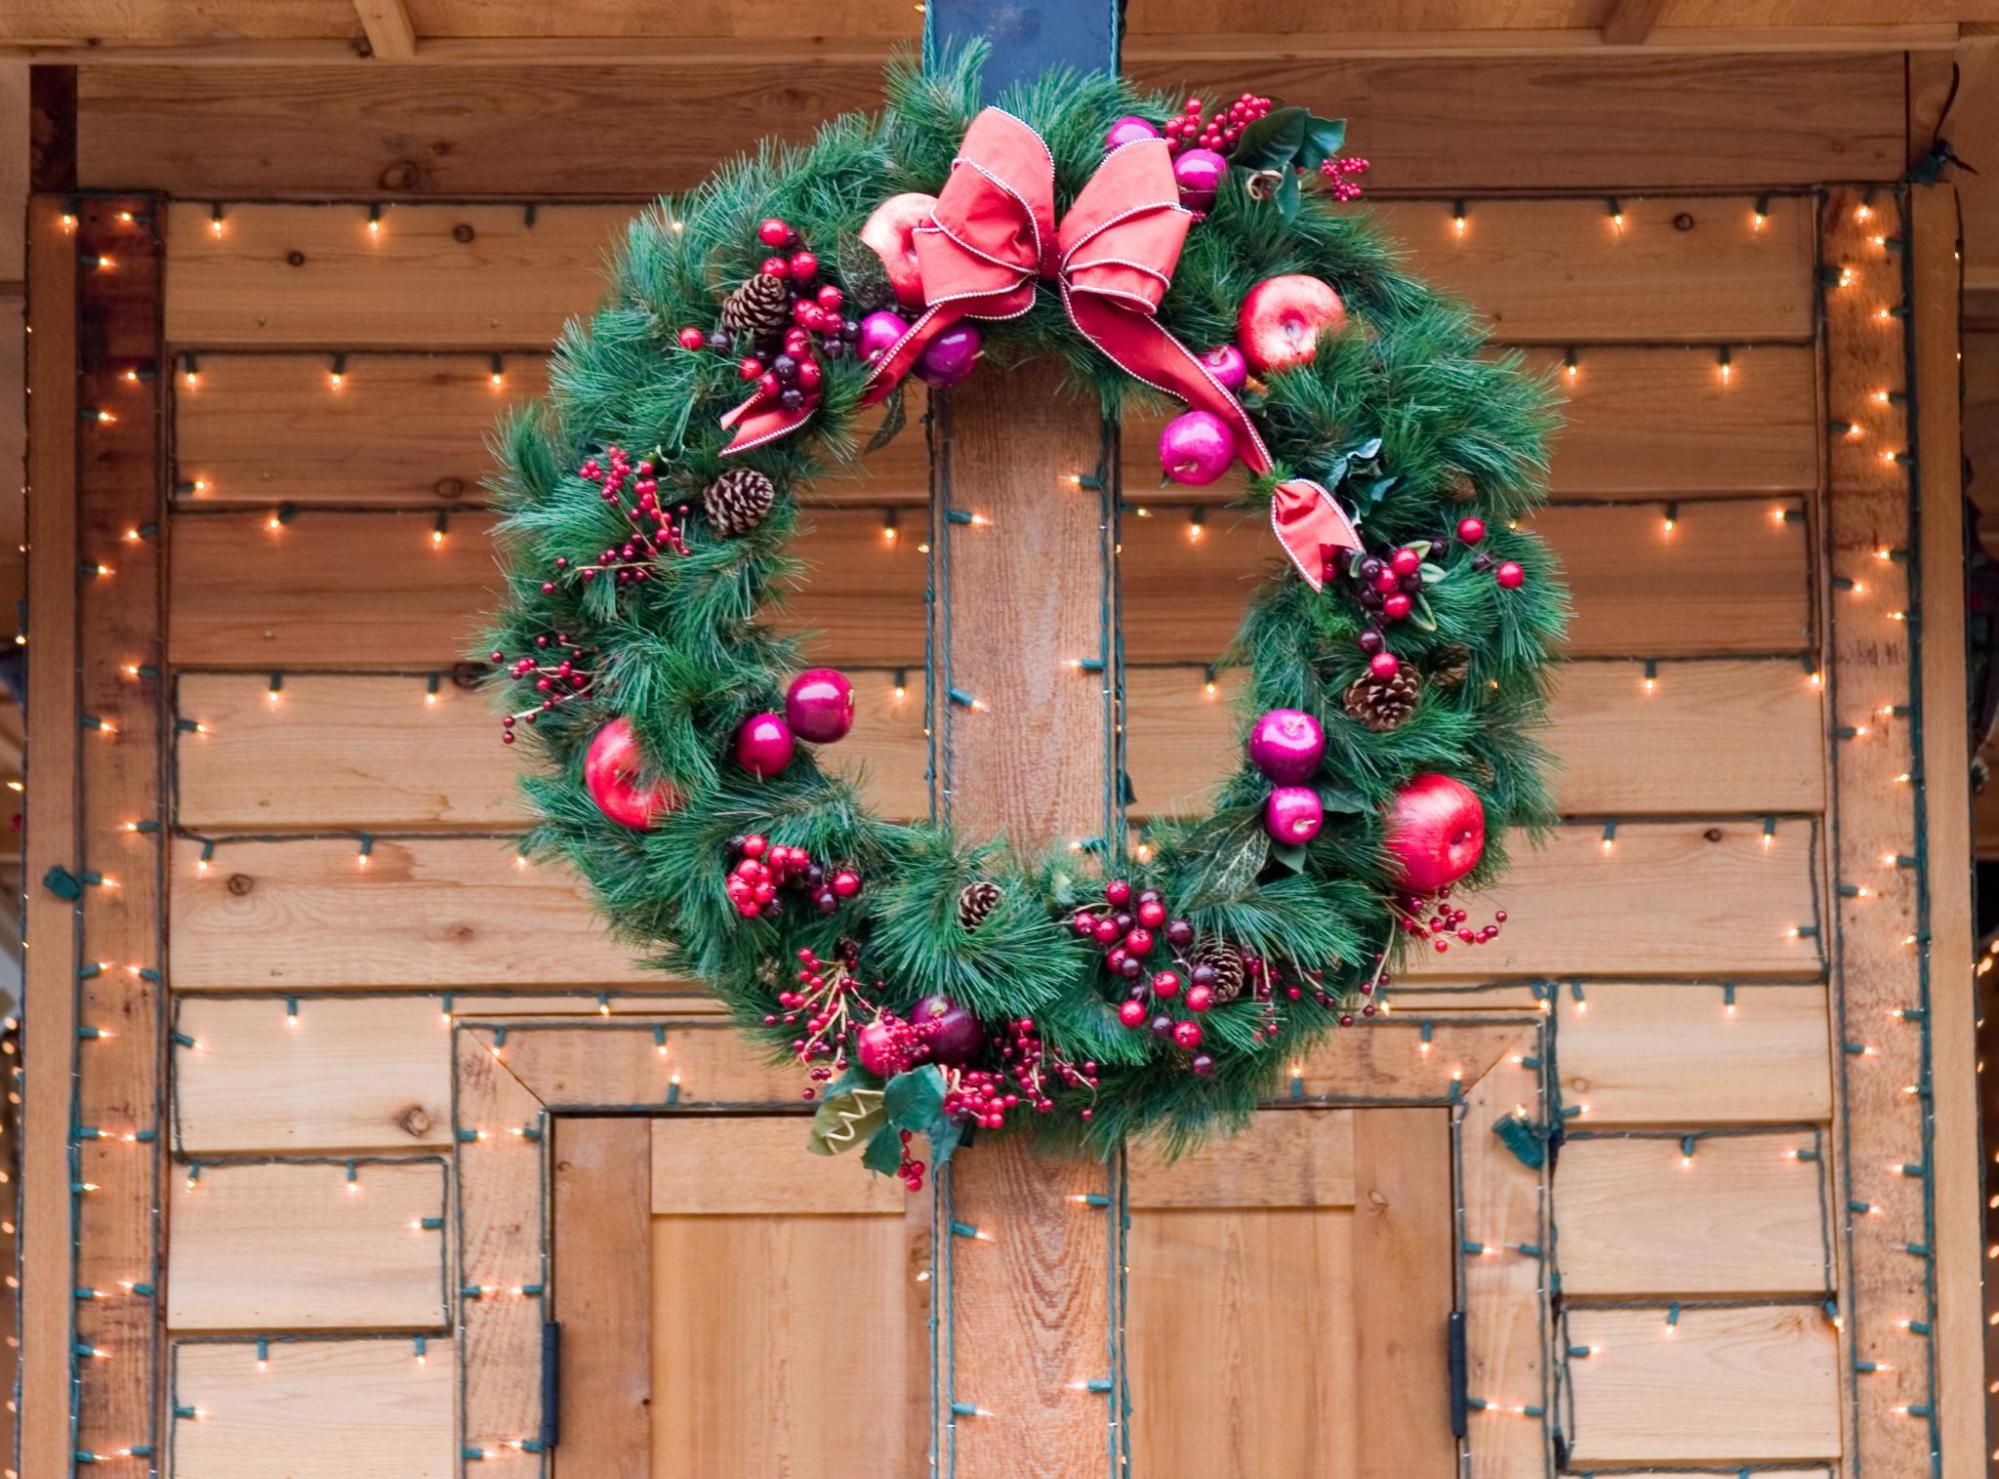 Christmas wreath with lights adorning wooden porch